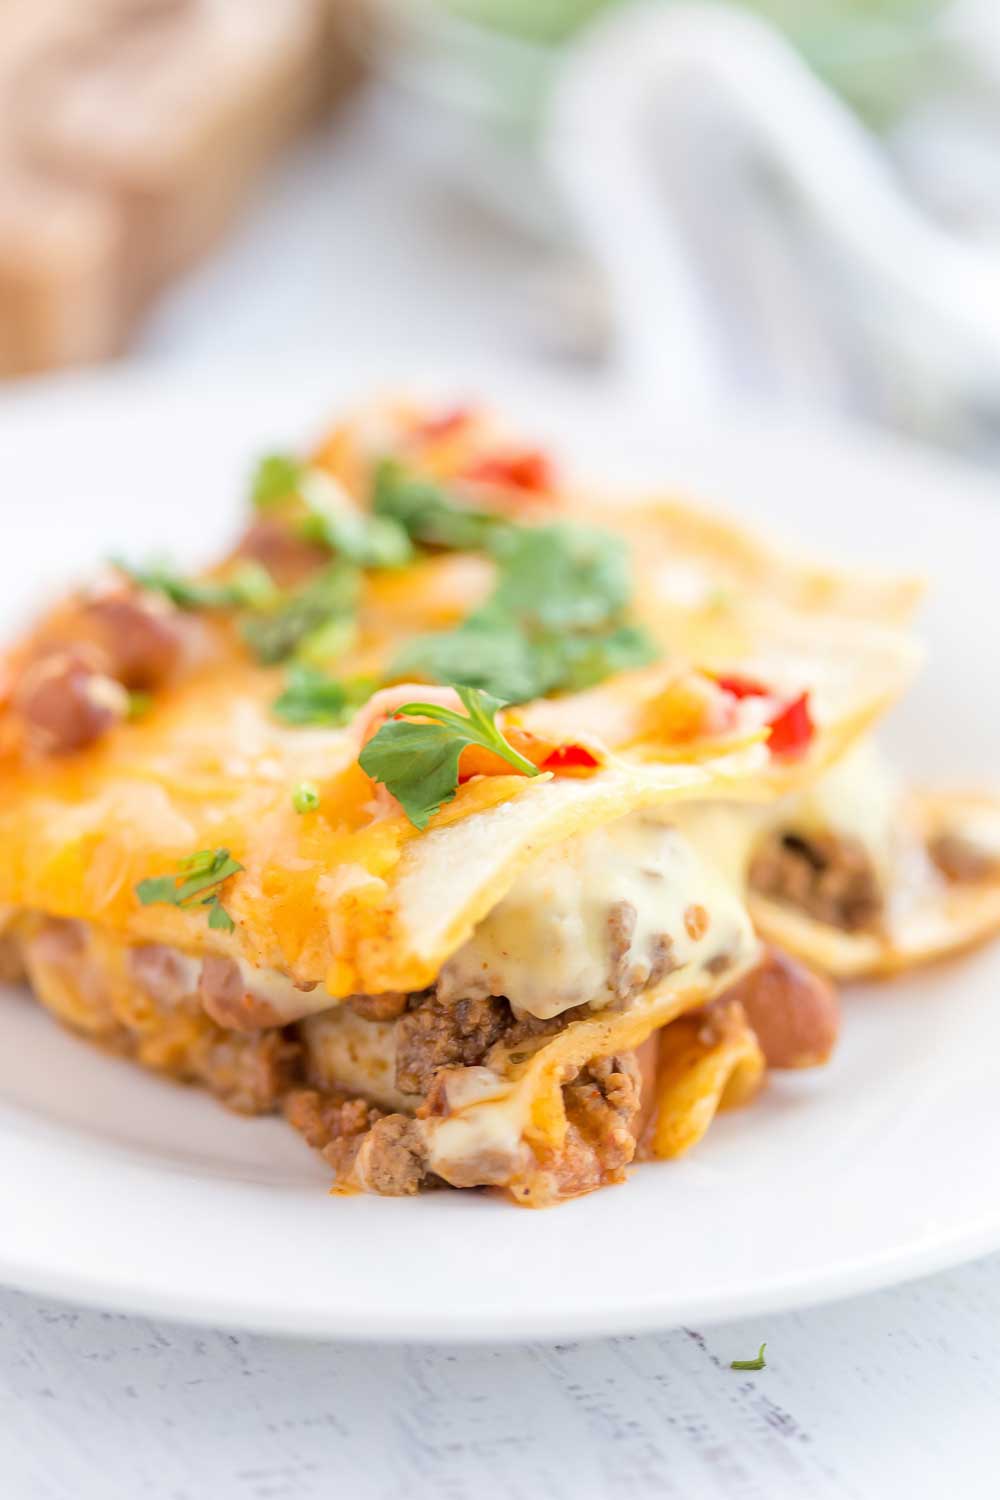 Mexican Lasagna with stacked tortillas, seasoned ground beef, beans, Rotel tomatoes, and cheese!